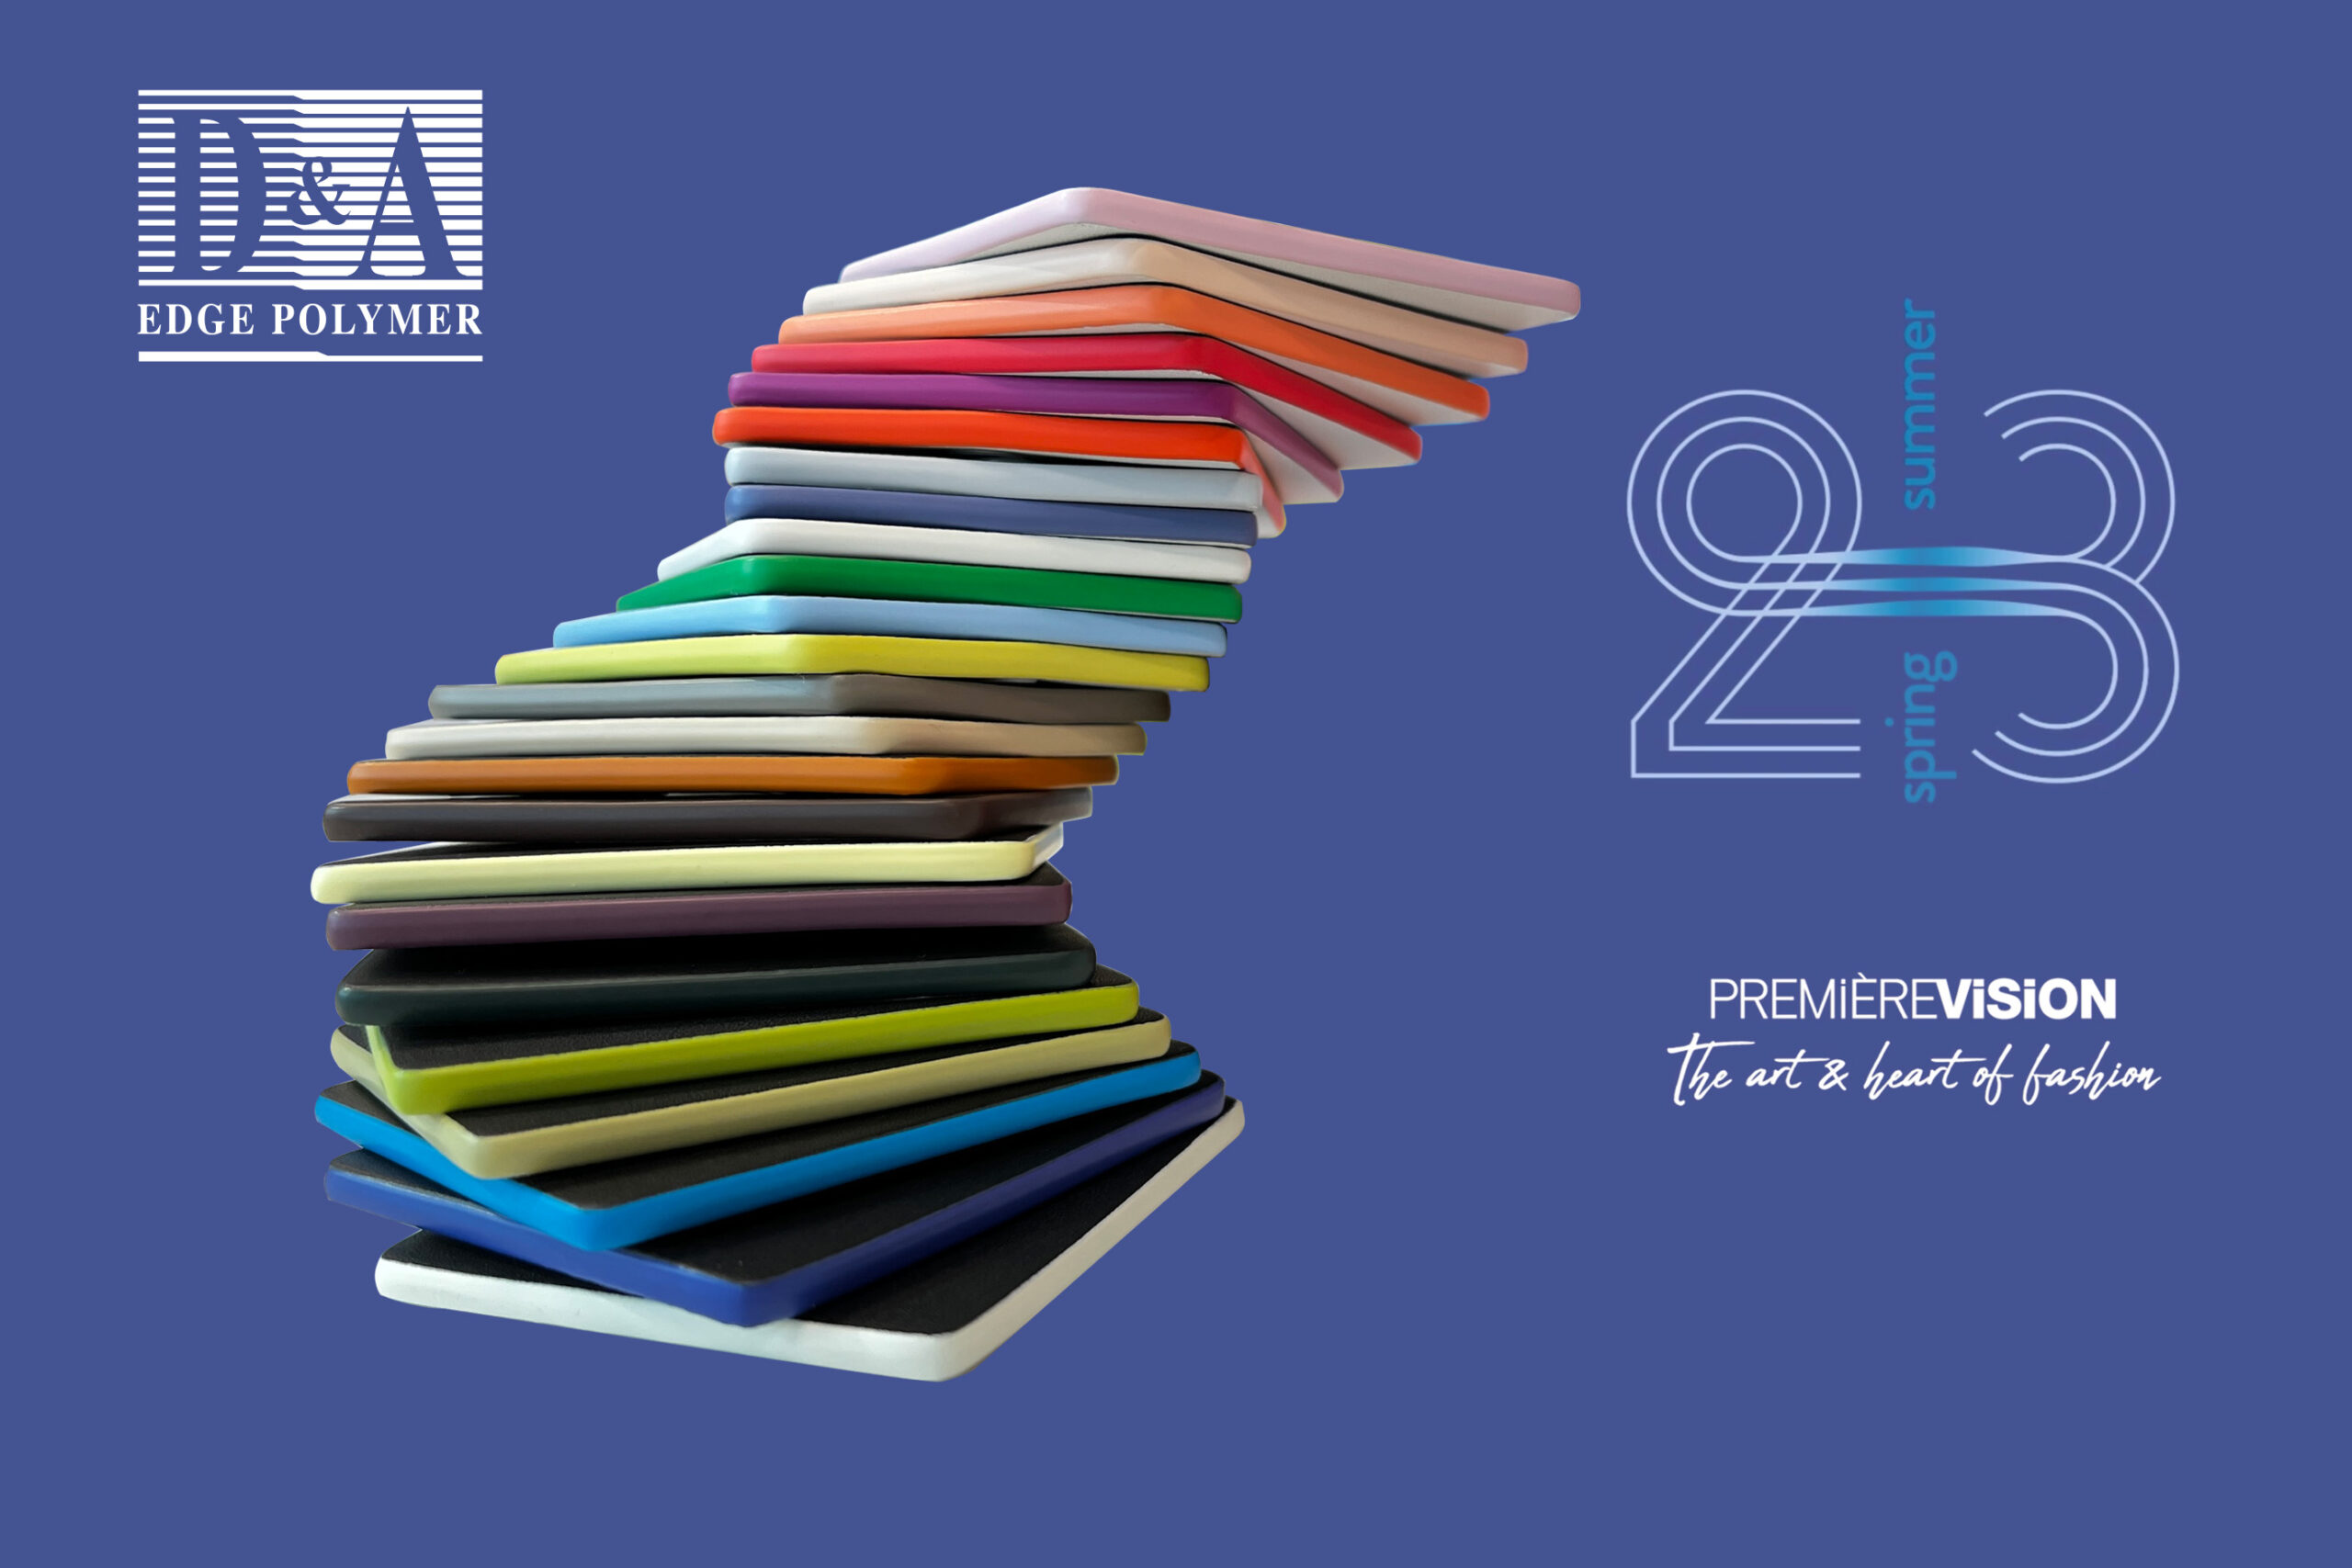 Keeping up with the Première Vision Color Trends | D&A Edge Polymer launched the PV Spring-Summer 23 Trend Color